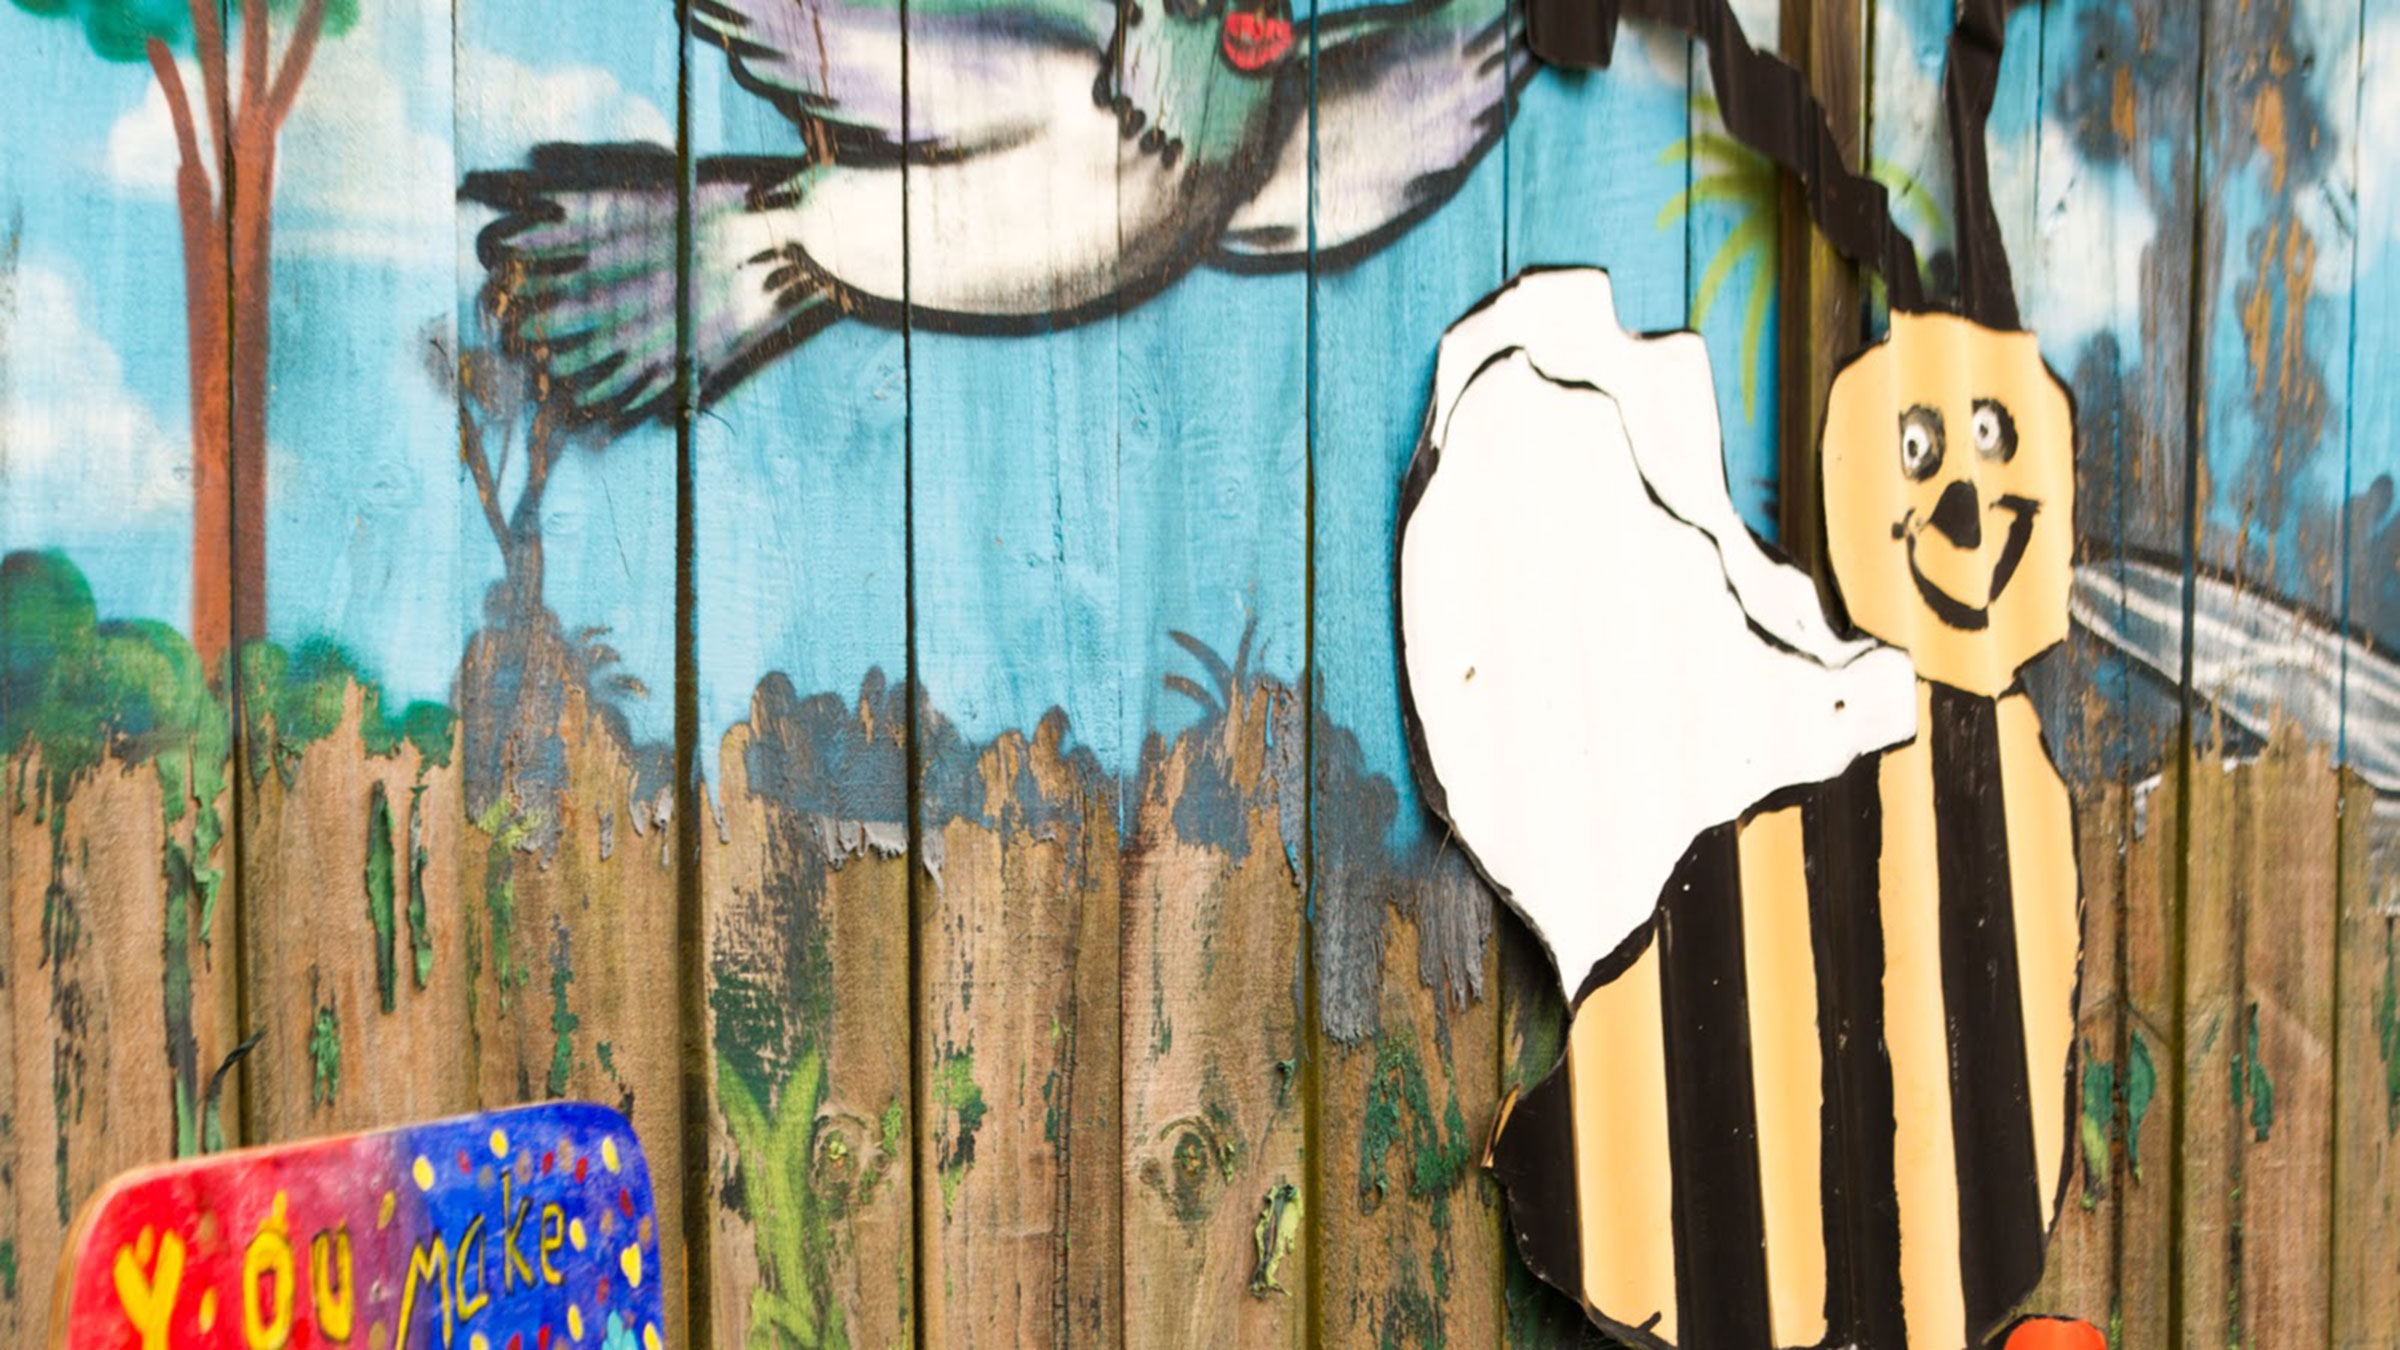 A mural of a bumble bee and a bird on a fence.